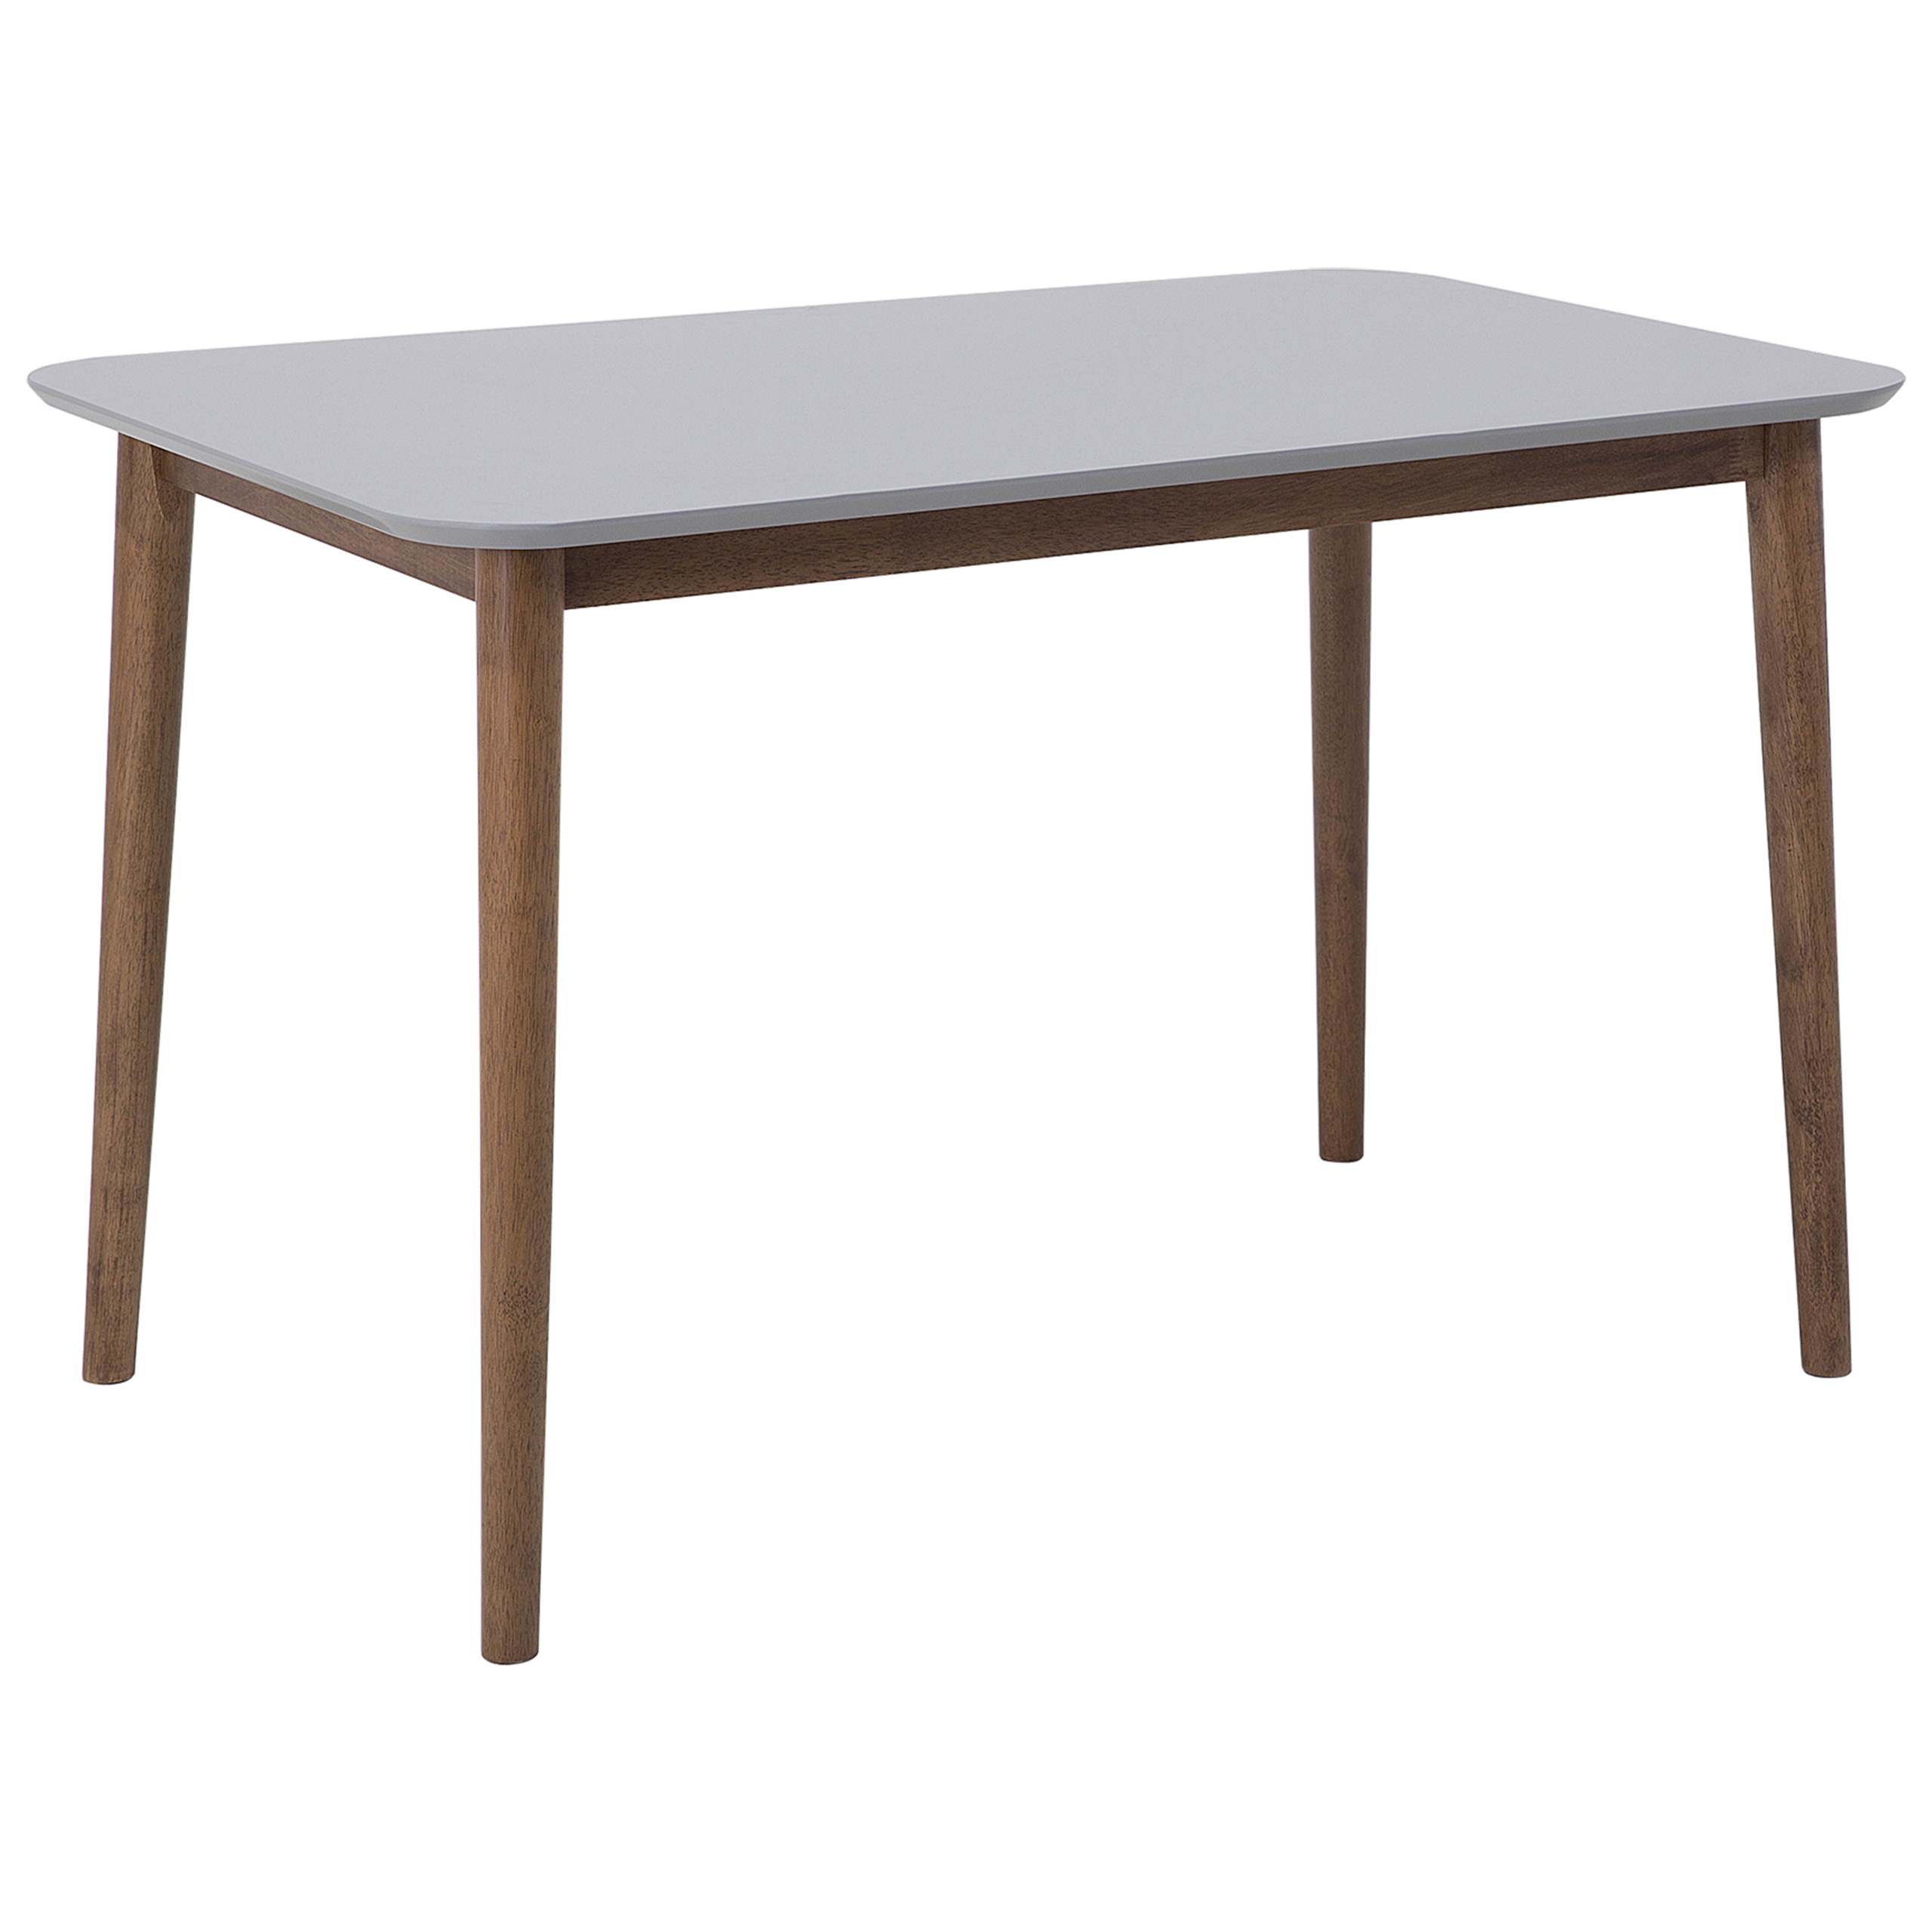 Beliani Dining Table Grey MDF Tabletop 73 x 118 x 77 cm Wooden Legs Kitchen Table